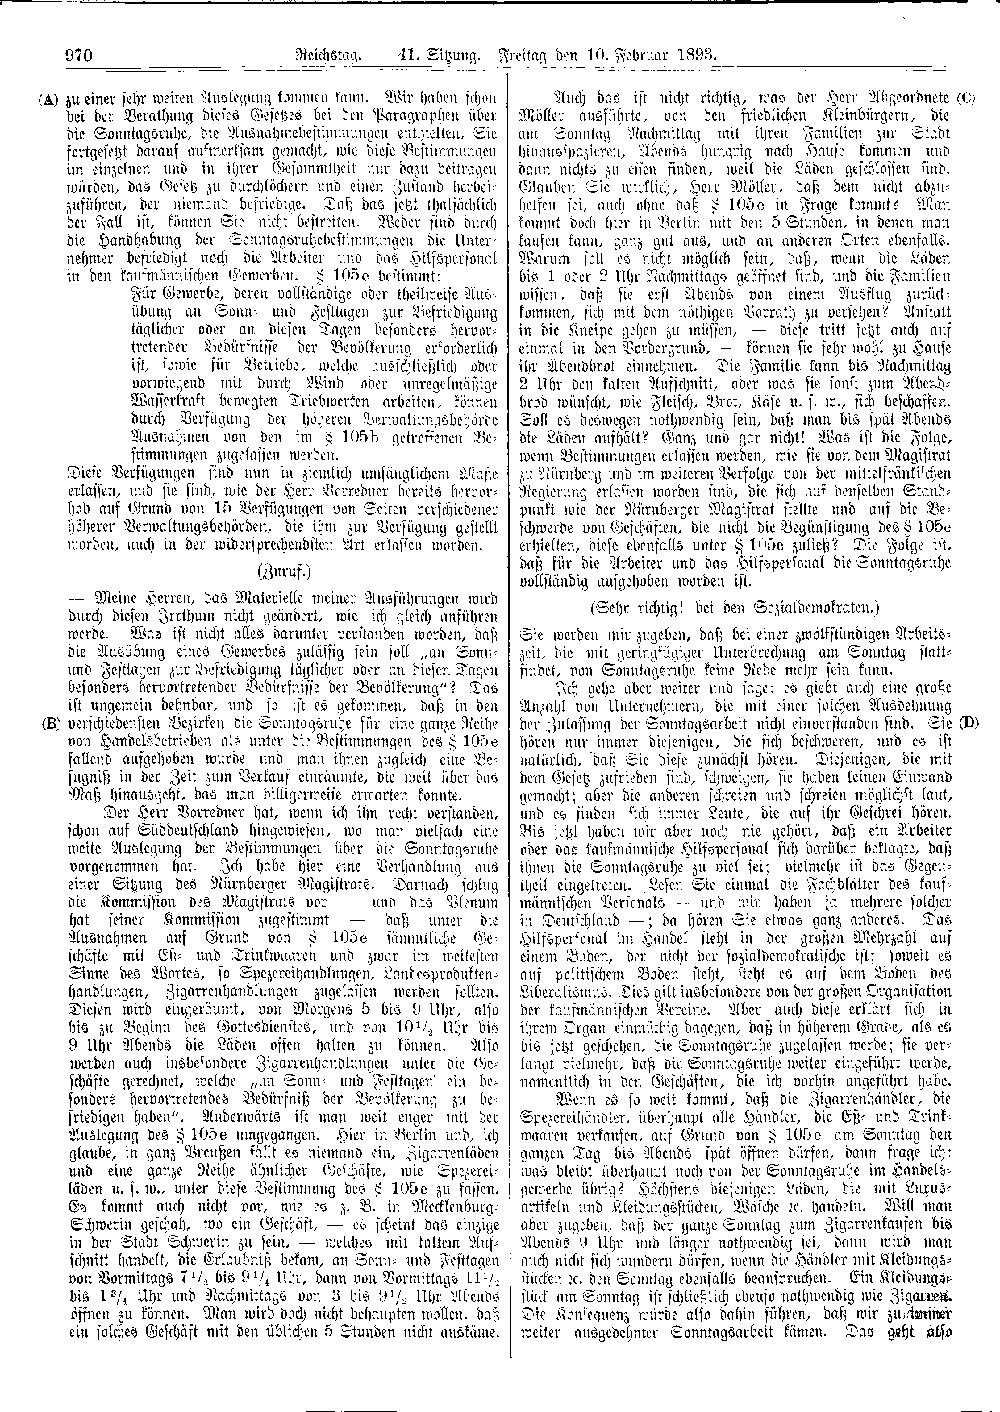 Scan of page 970